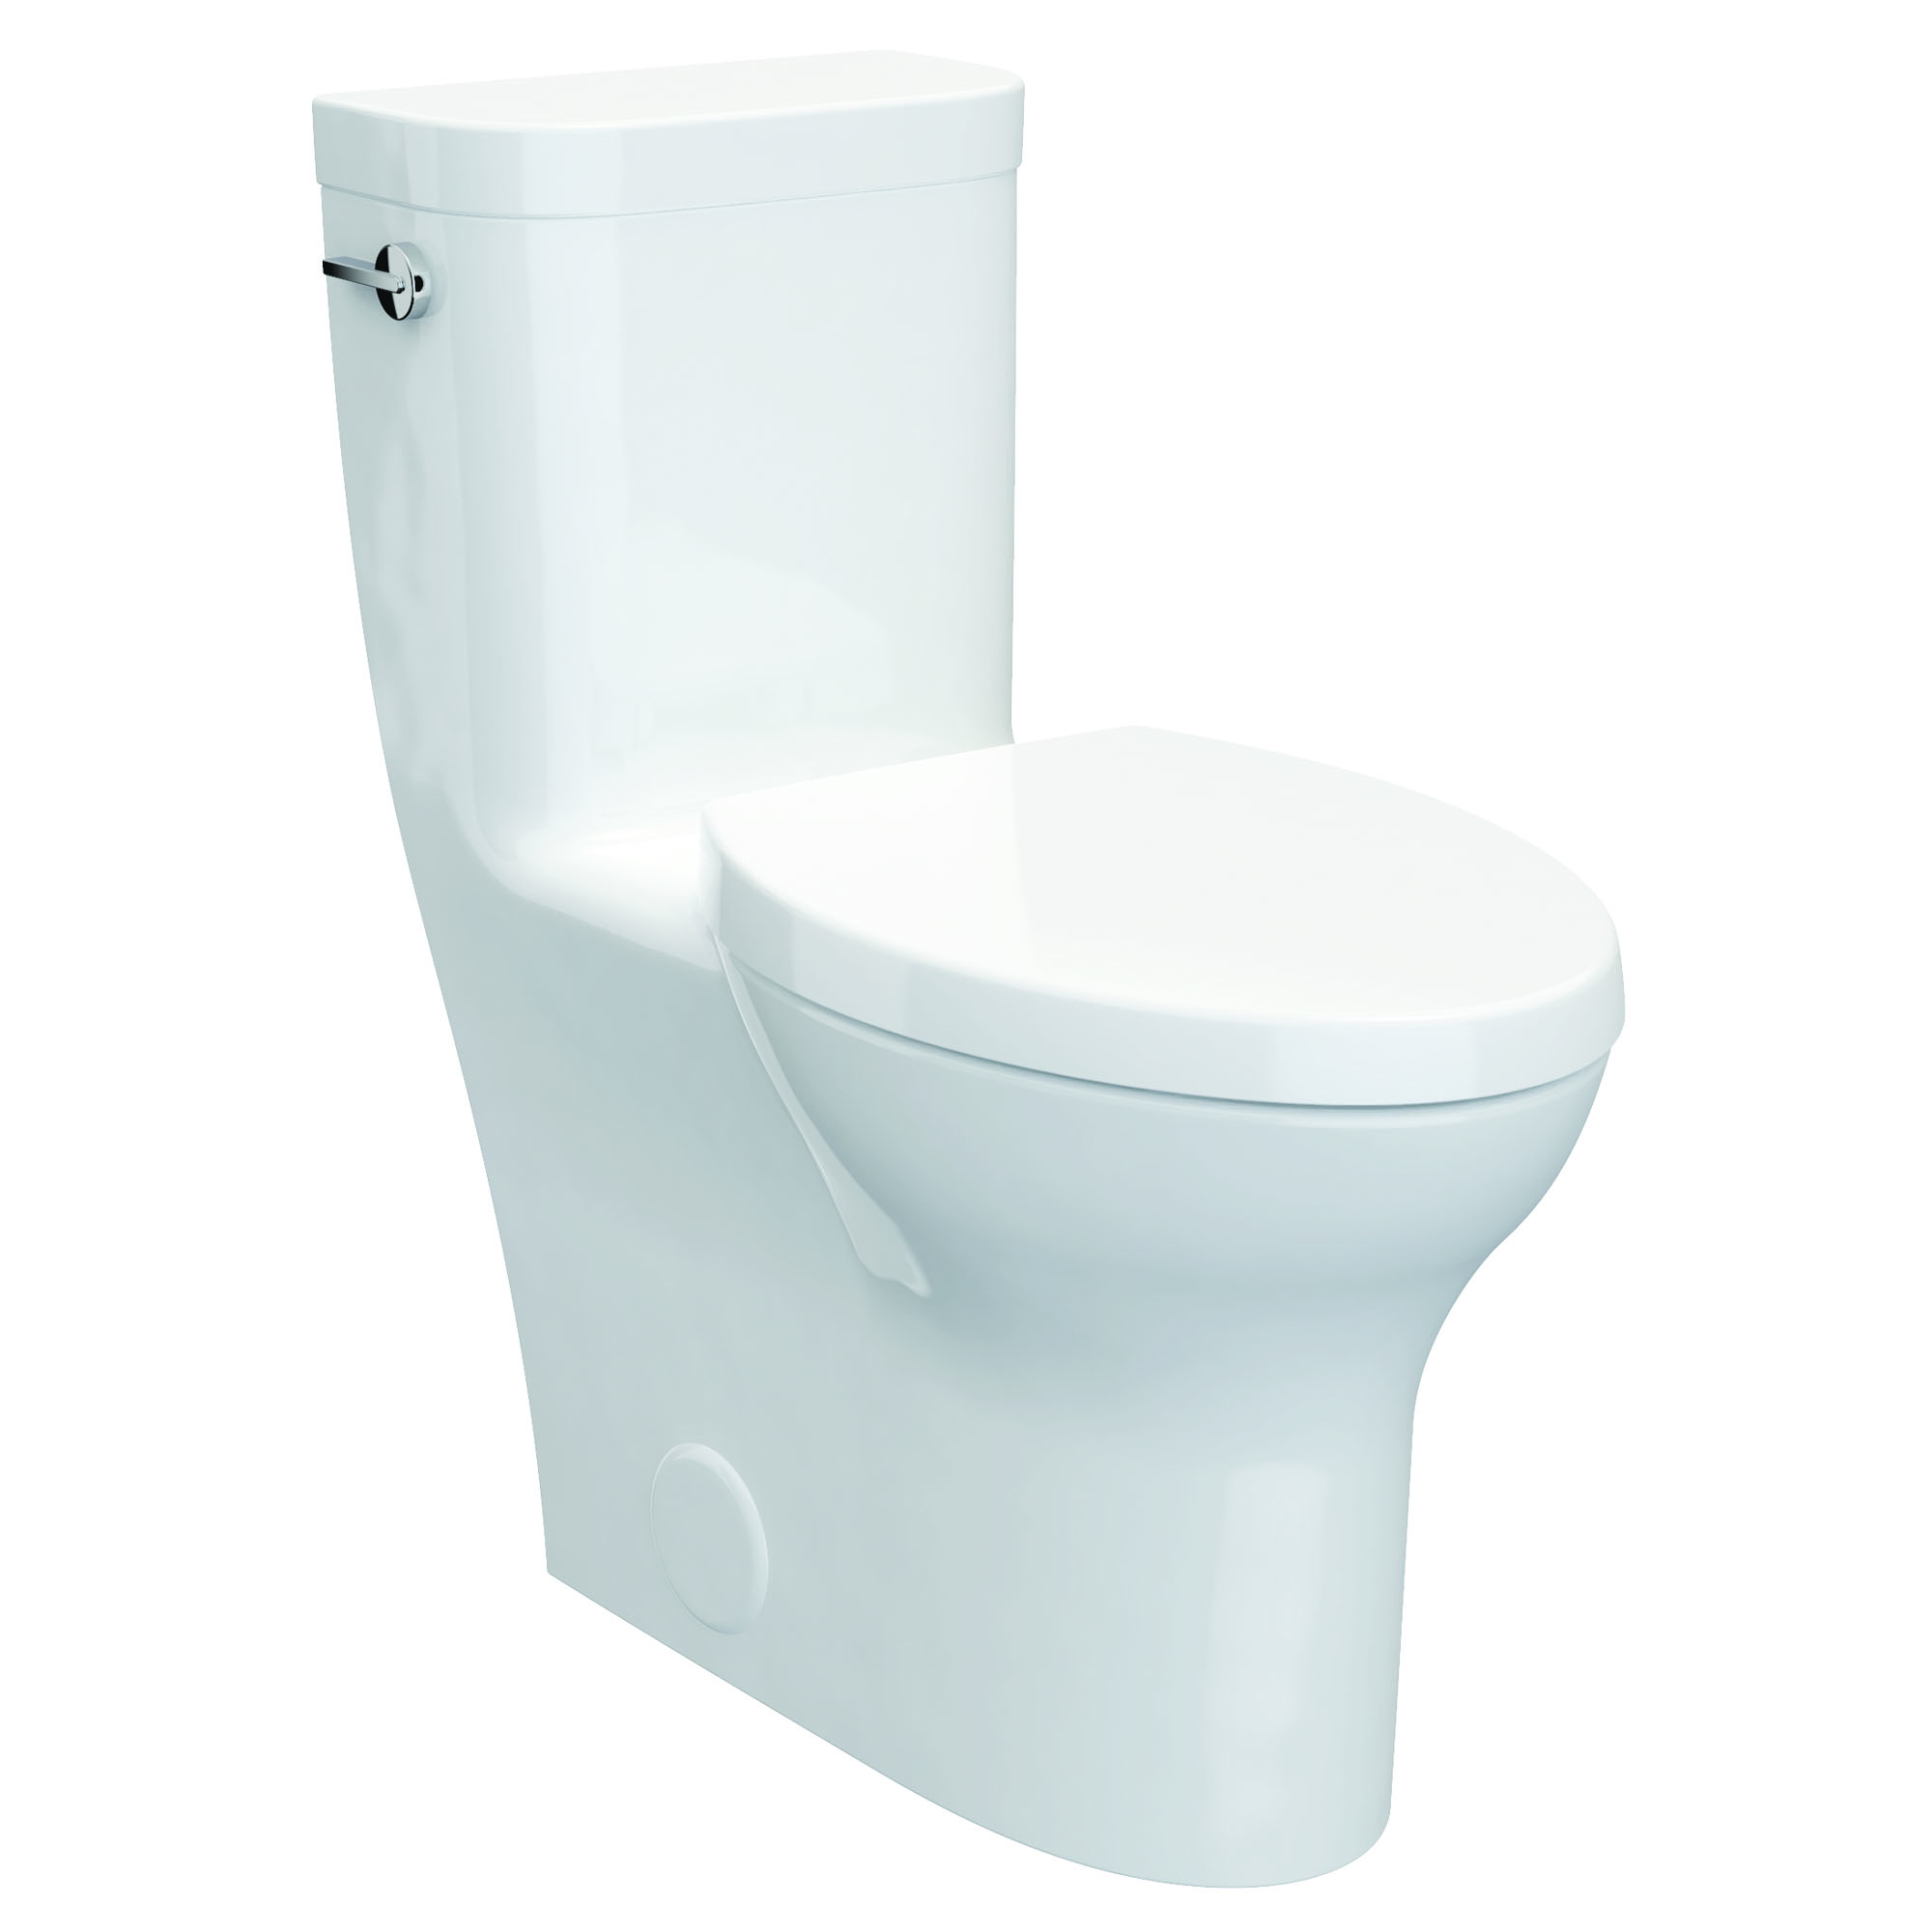 Equility® One-Piece Chair-Height Left-Hand Trip Lever Elongated Toilet with Seat